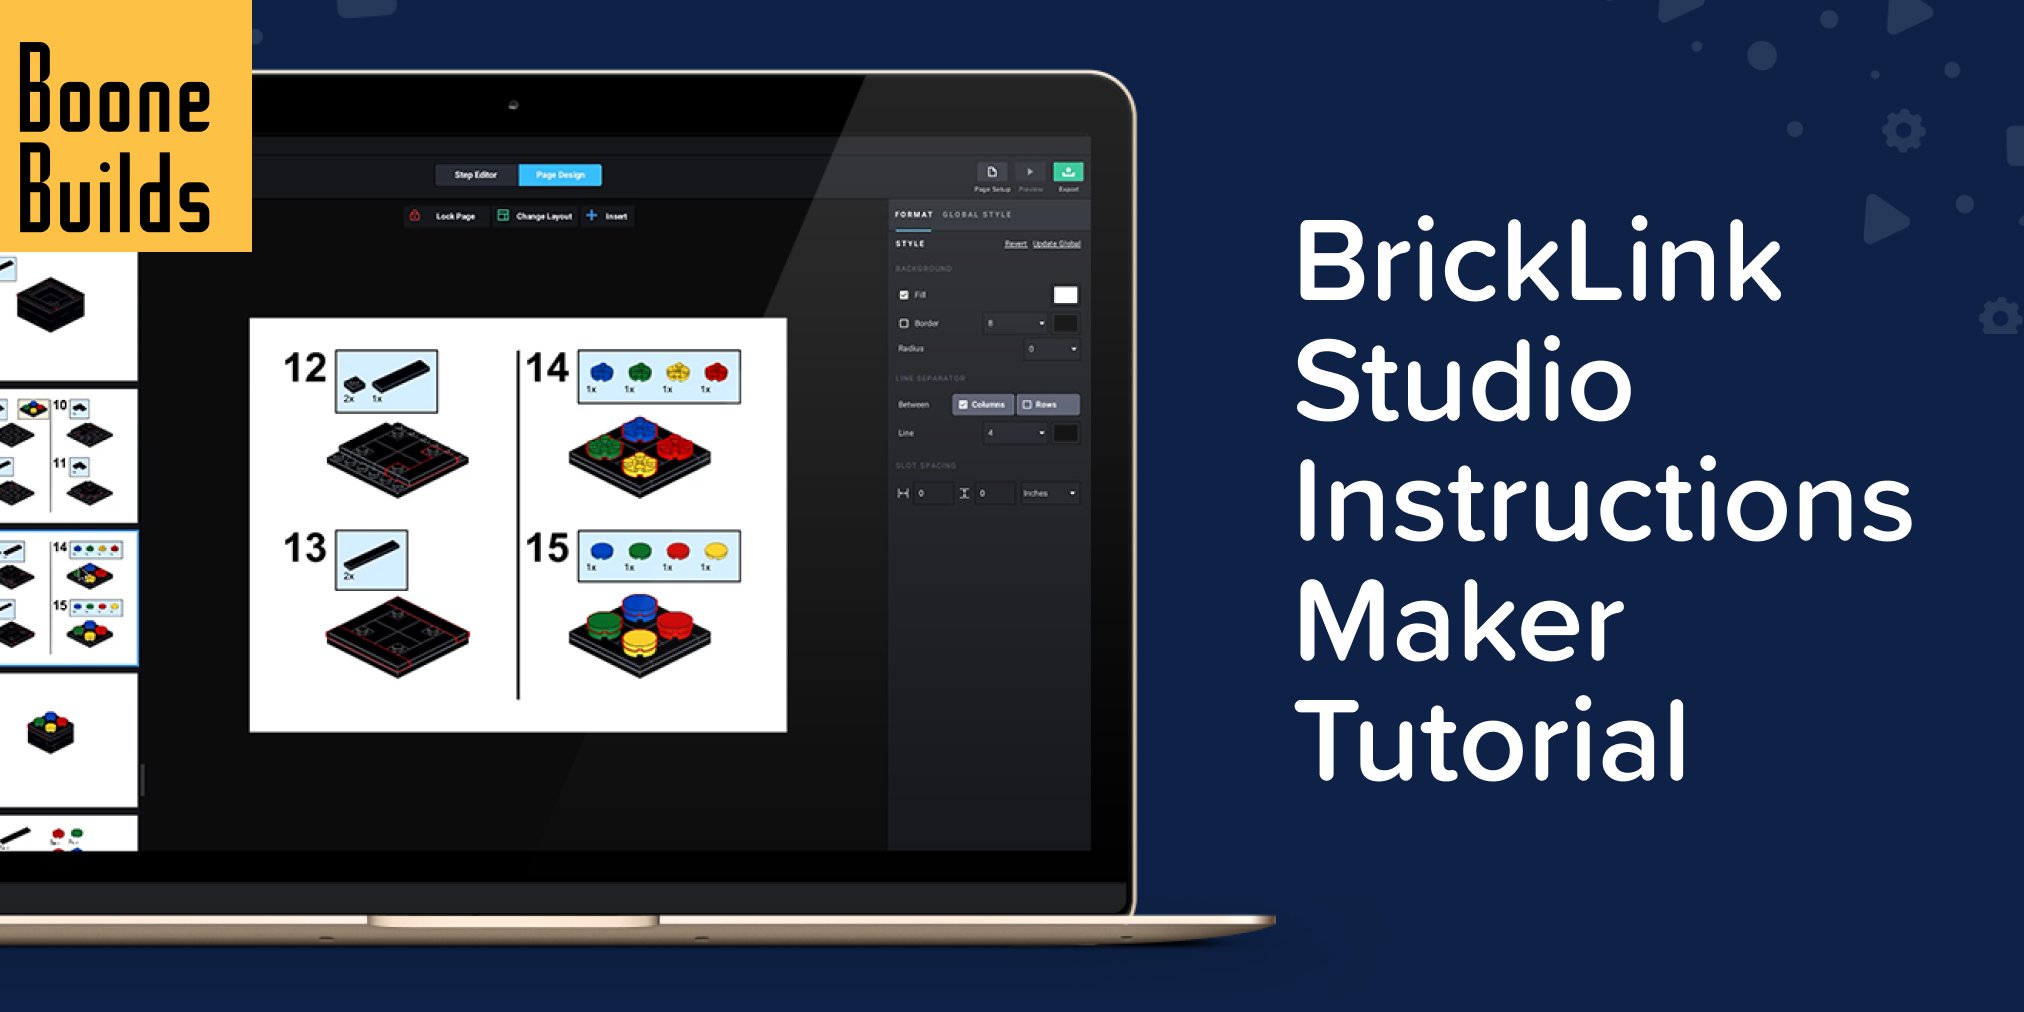 BrickLink on "Want to create your LEGO building instructions? You can with BrickLink Studio! Learn how to use Instruction Maker in this tutorial video: https://t.co/9rnr63DzDa #BrickLink #BrickLinkStudio #LEGODigitalDesigner https://t.co ...